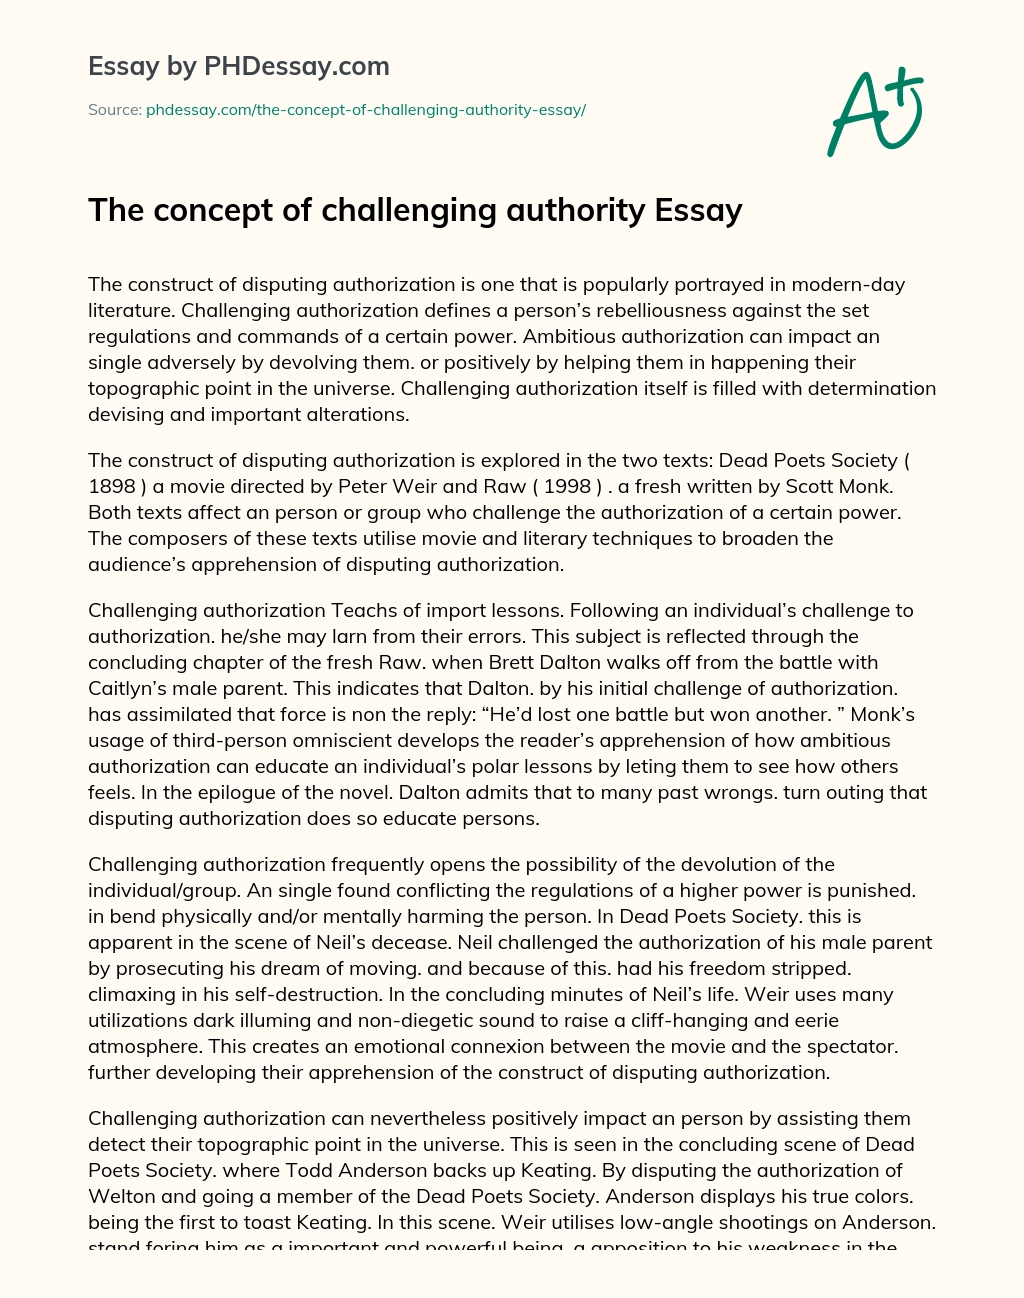 The concept of challenging authority Essay essay